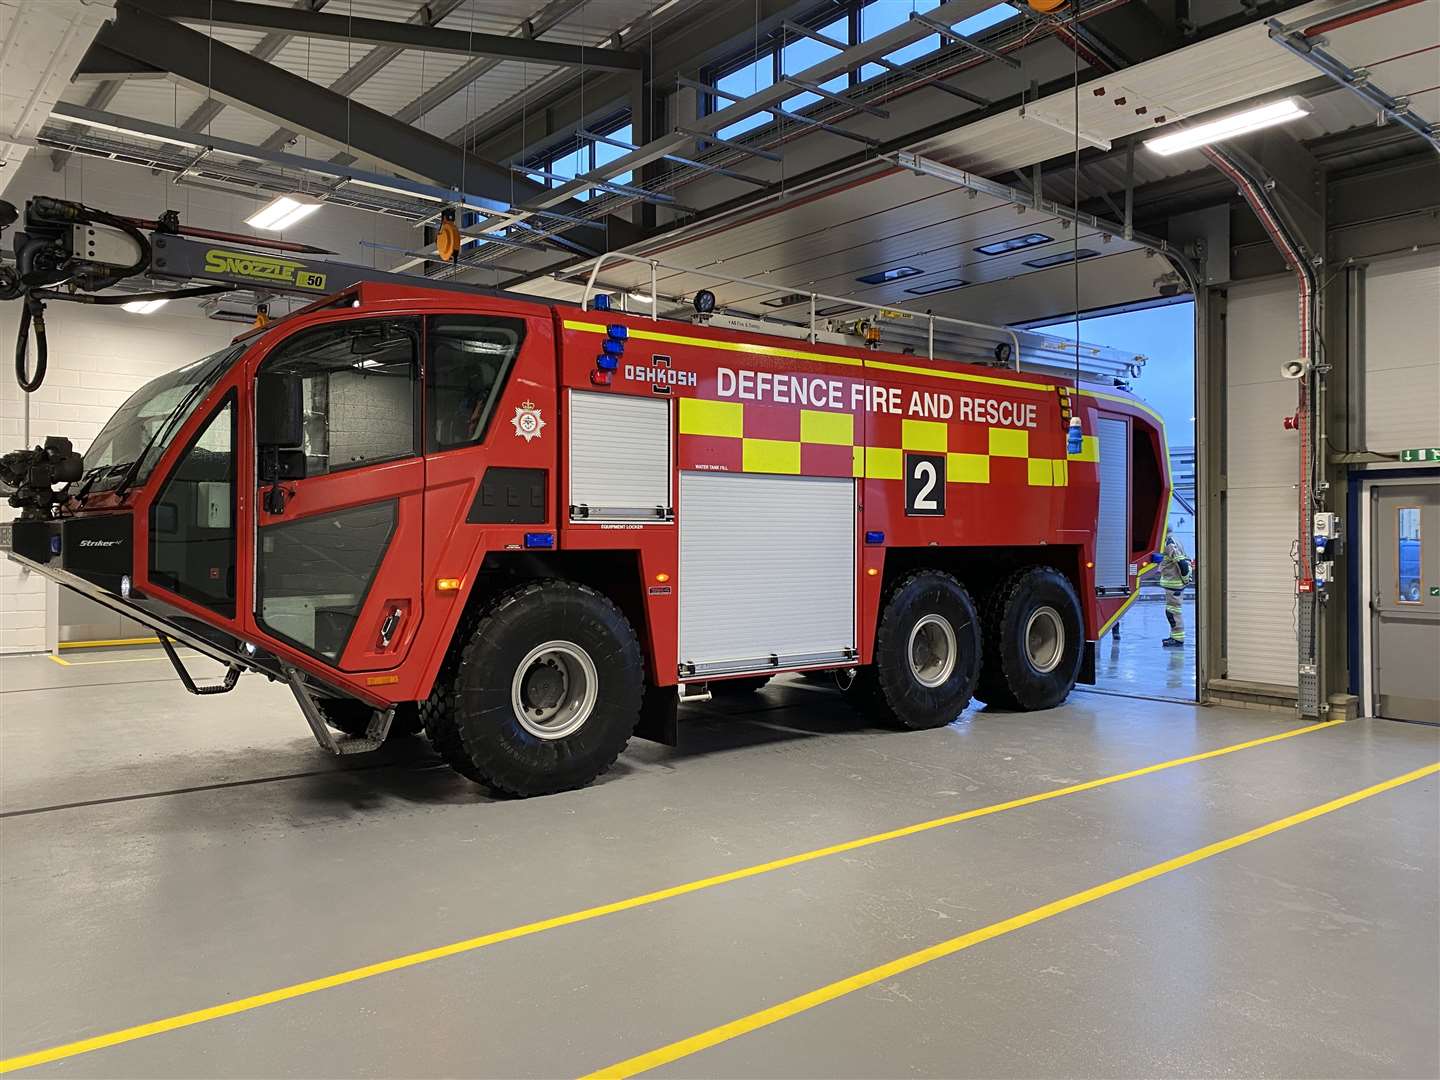 A new fire engine in the Crash, Fire and Rescue building at RAF Lossiemouth. (Copyright Henry Brothers)